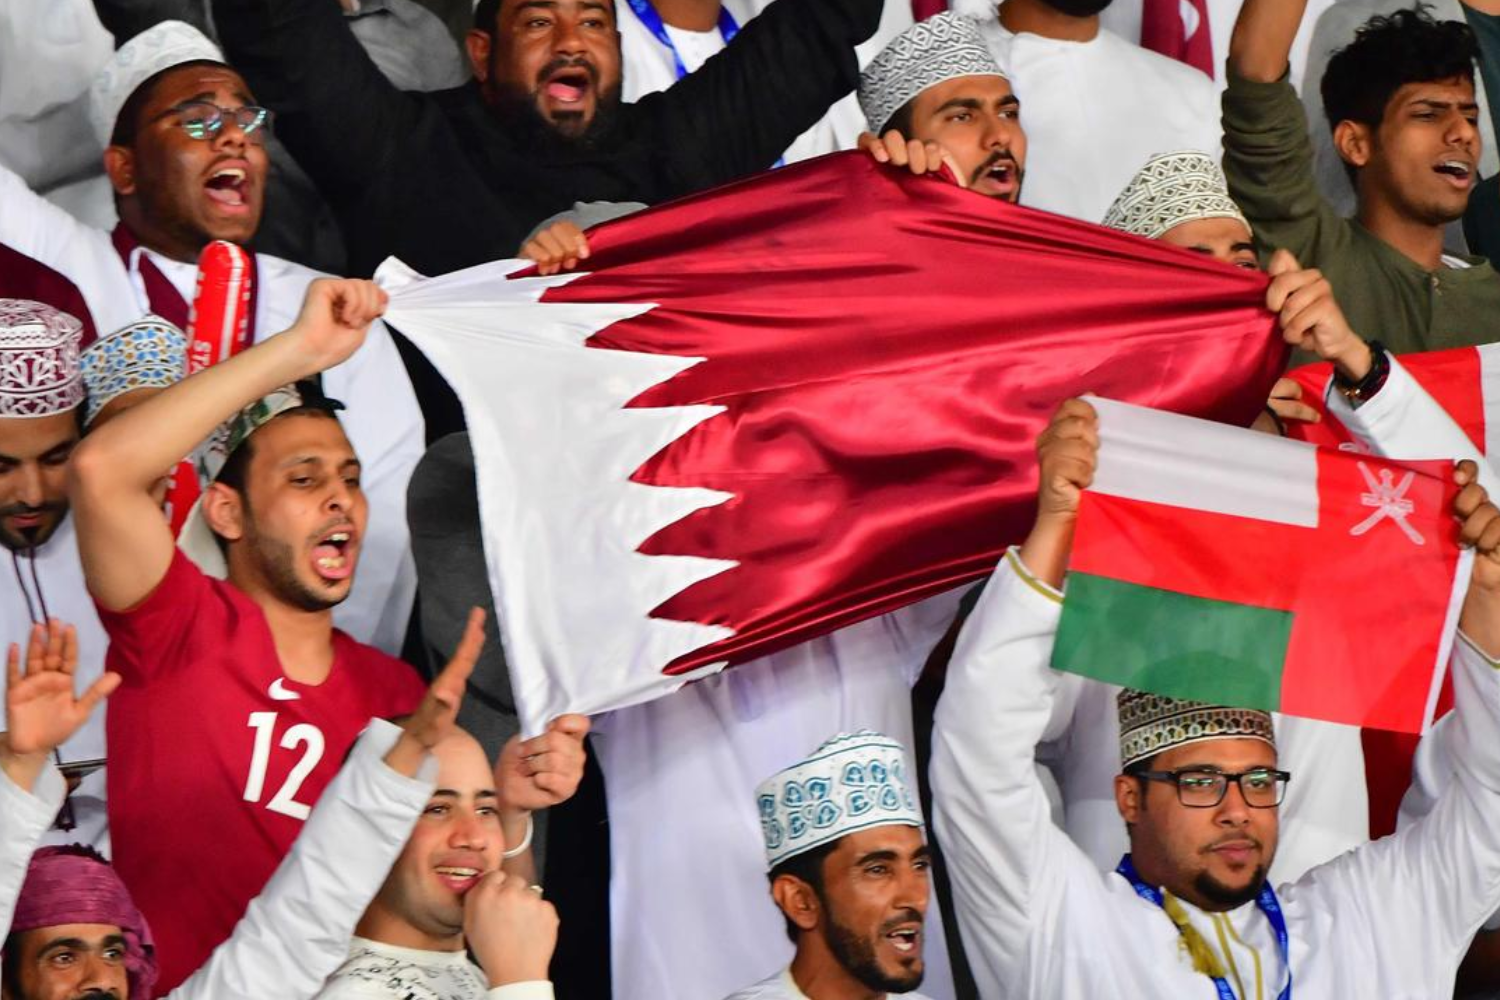 Qatar World Cup 2022 Predicted To Be ‘Biggest Sausage Fest Ever’